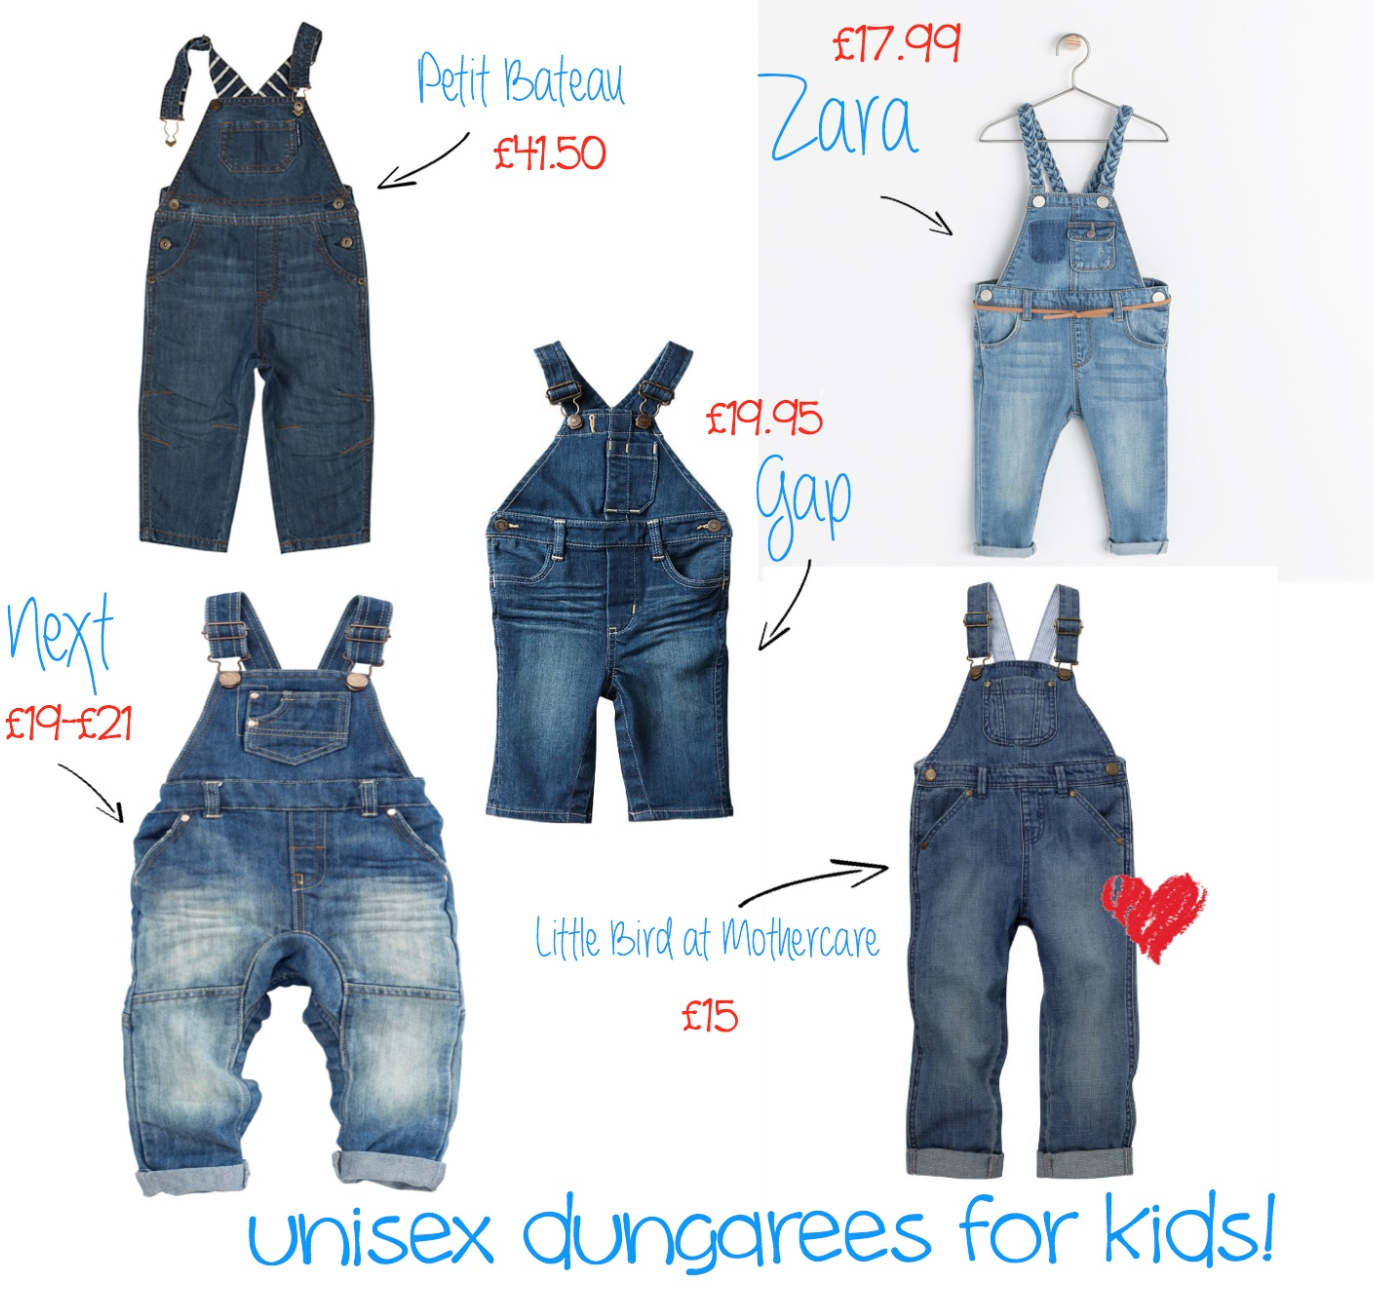 V. I. BUYS: Bump, baby and beyond - the denim piece EVERY mama and VIB needs this Spring! | mamas VIb kids dungarees | hot buys | little bird at mothercare | next | petsit bateau | zara kids | kids dungarees | unisex jeans | playtime clothes | mamasVIb | bonita turner | fashion editor | style | kids clothes | baby style | jeans | denim | hardwearing | overalls 